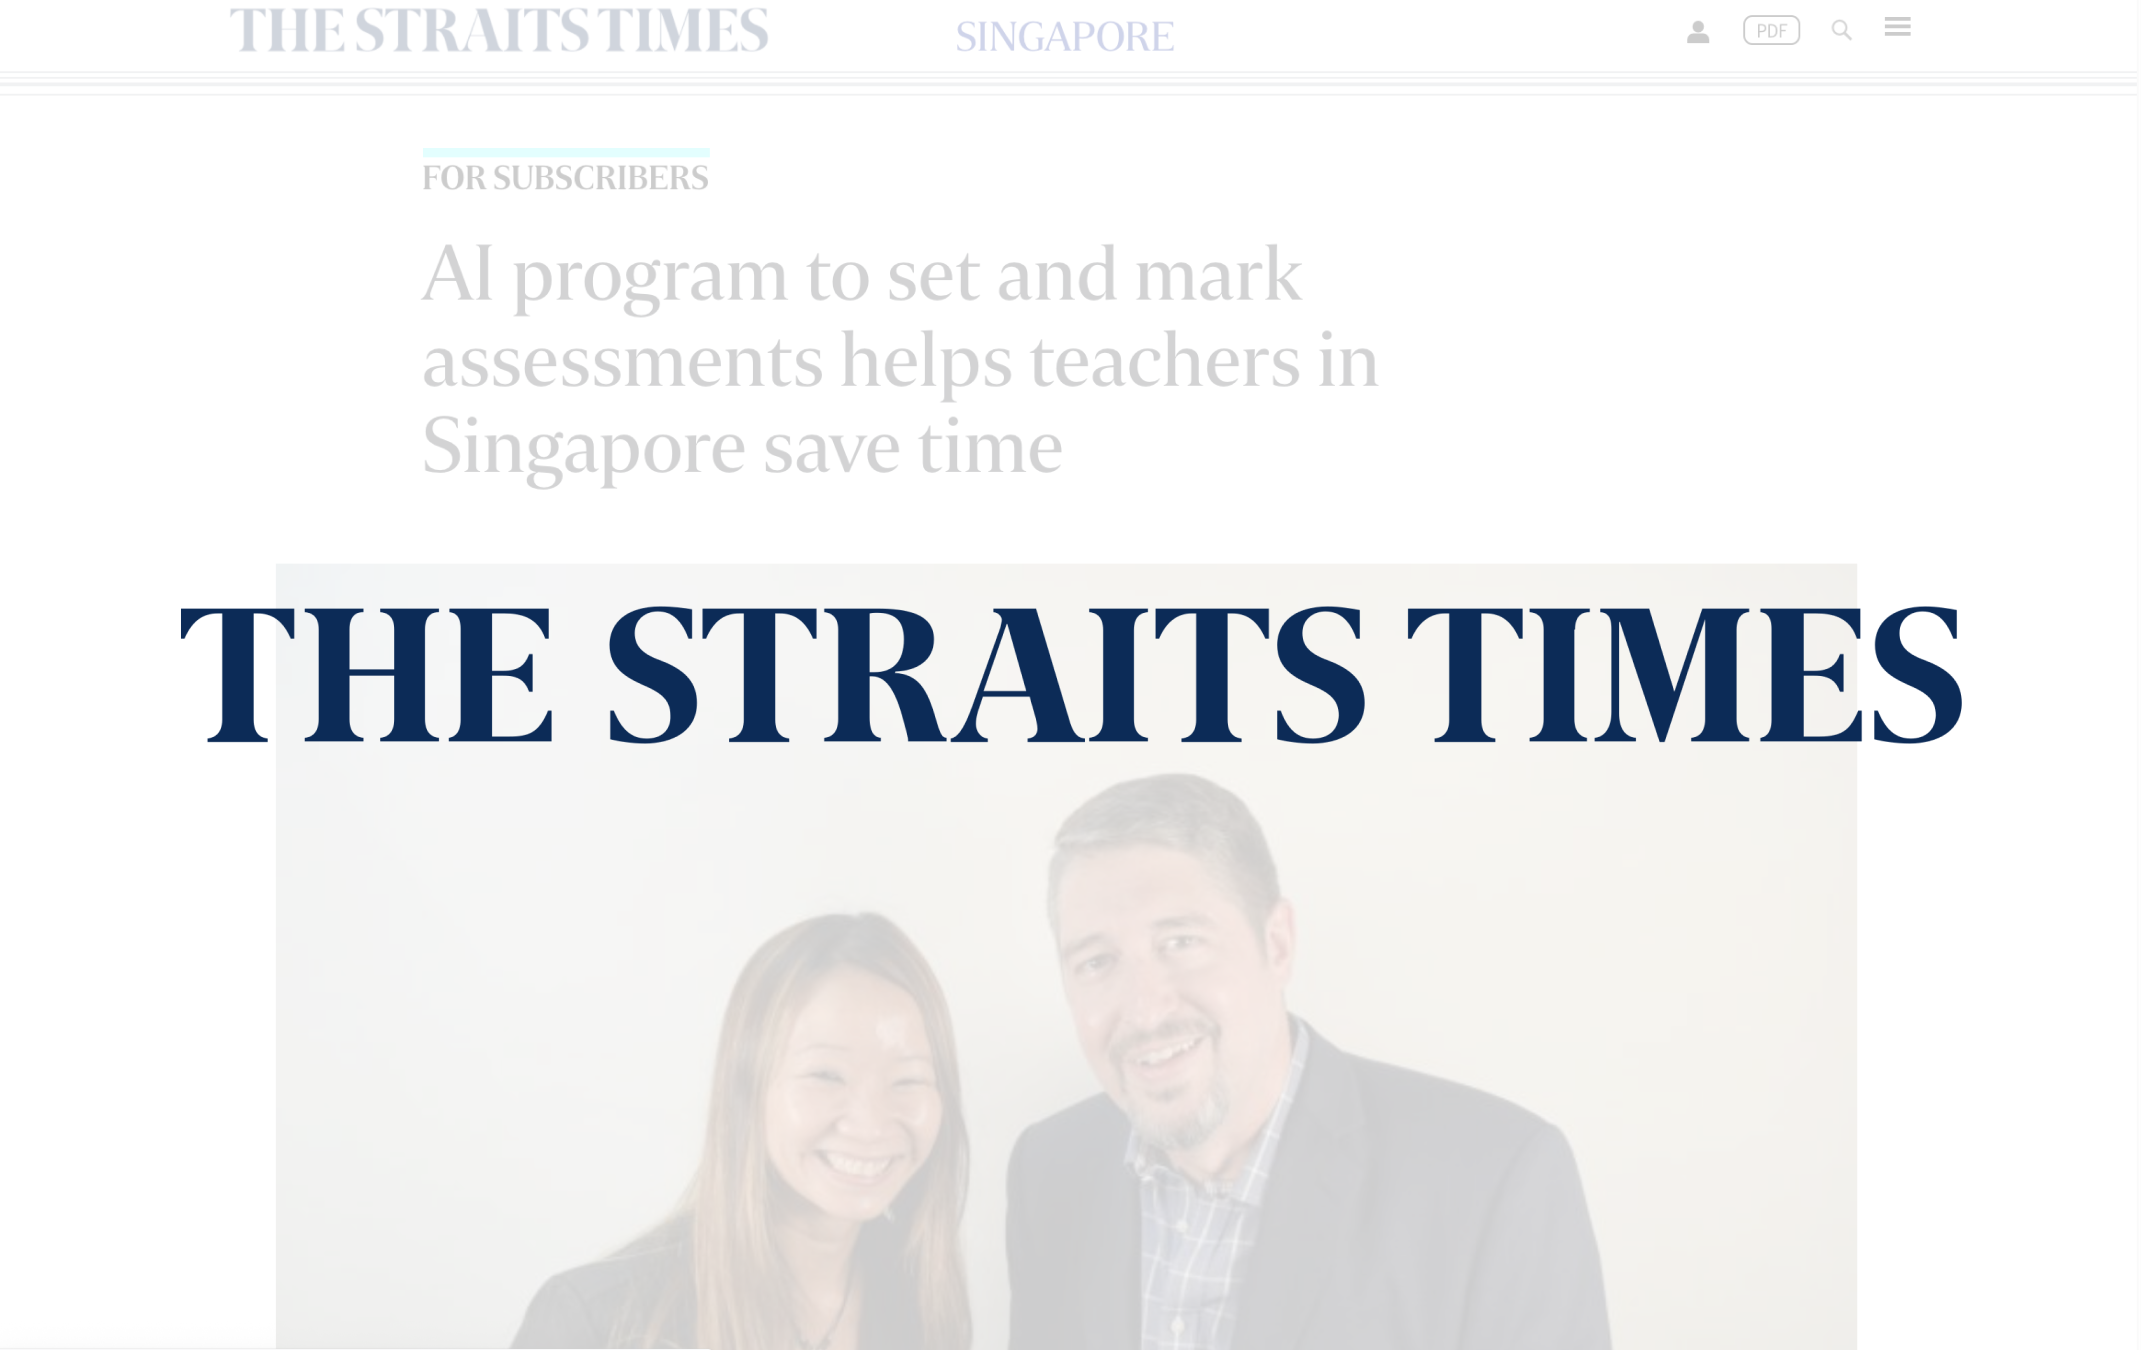 The Straits Times